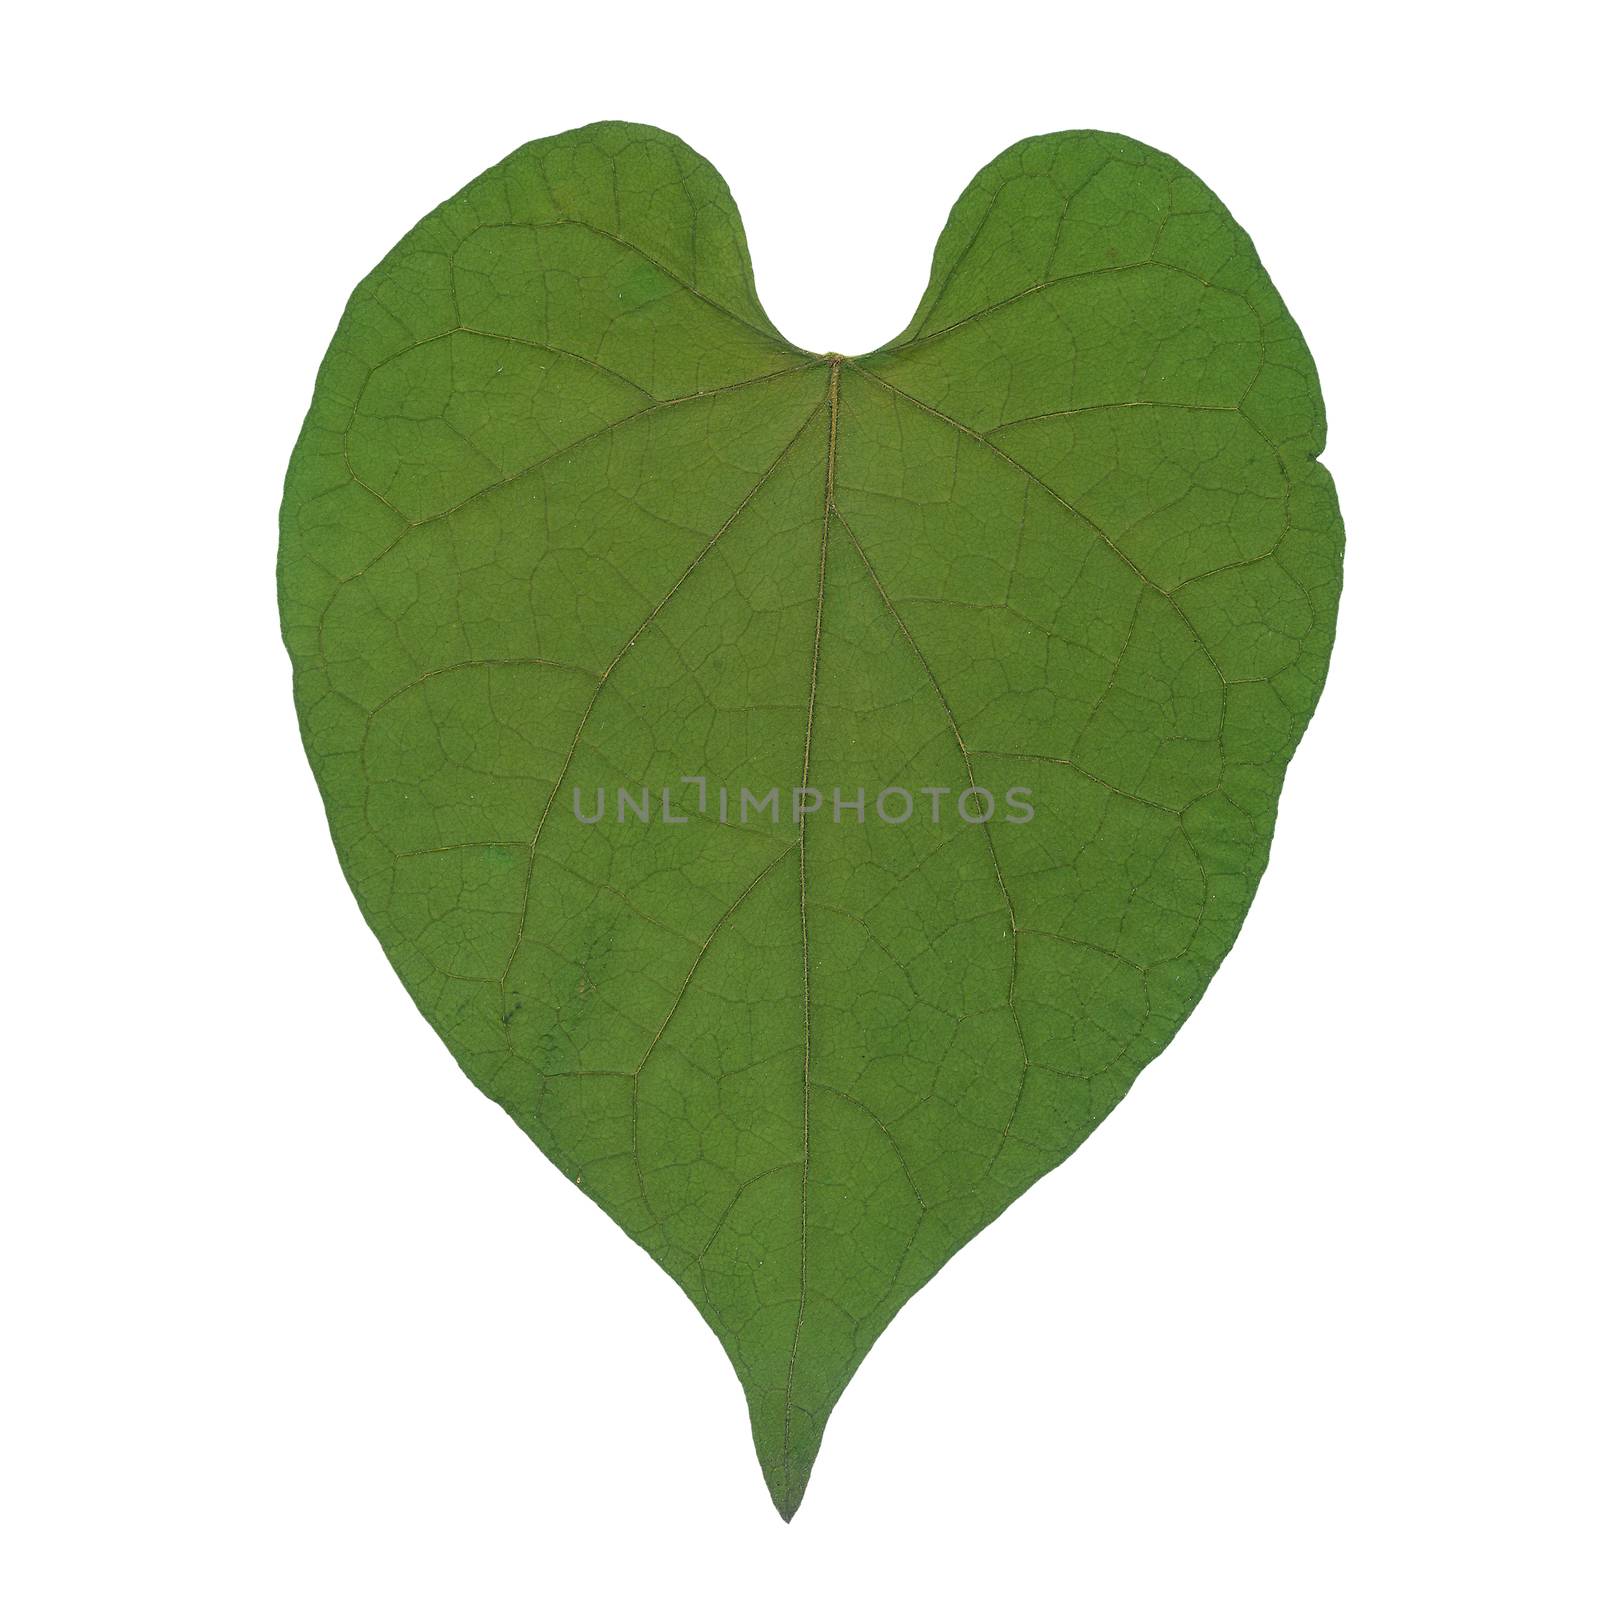 Green dry leaf in shape heart isolated on white background